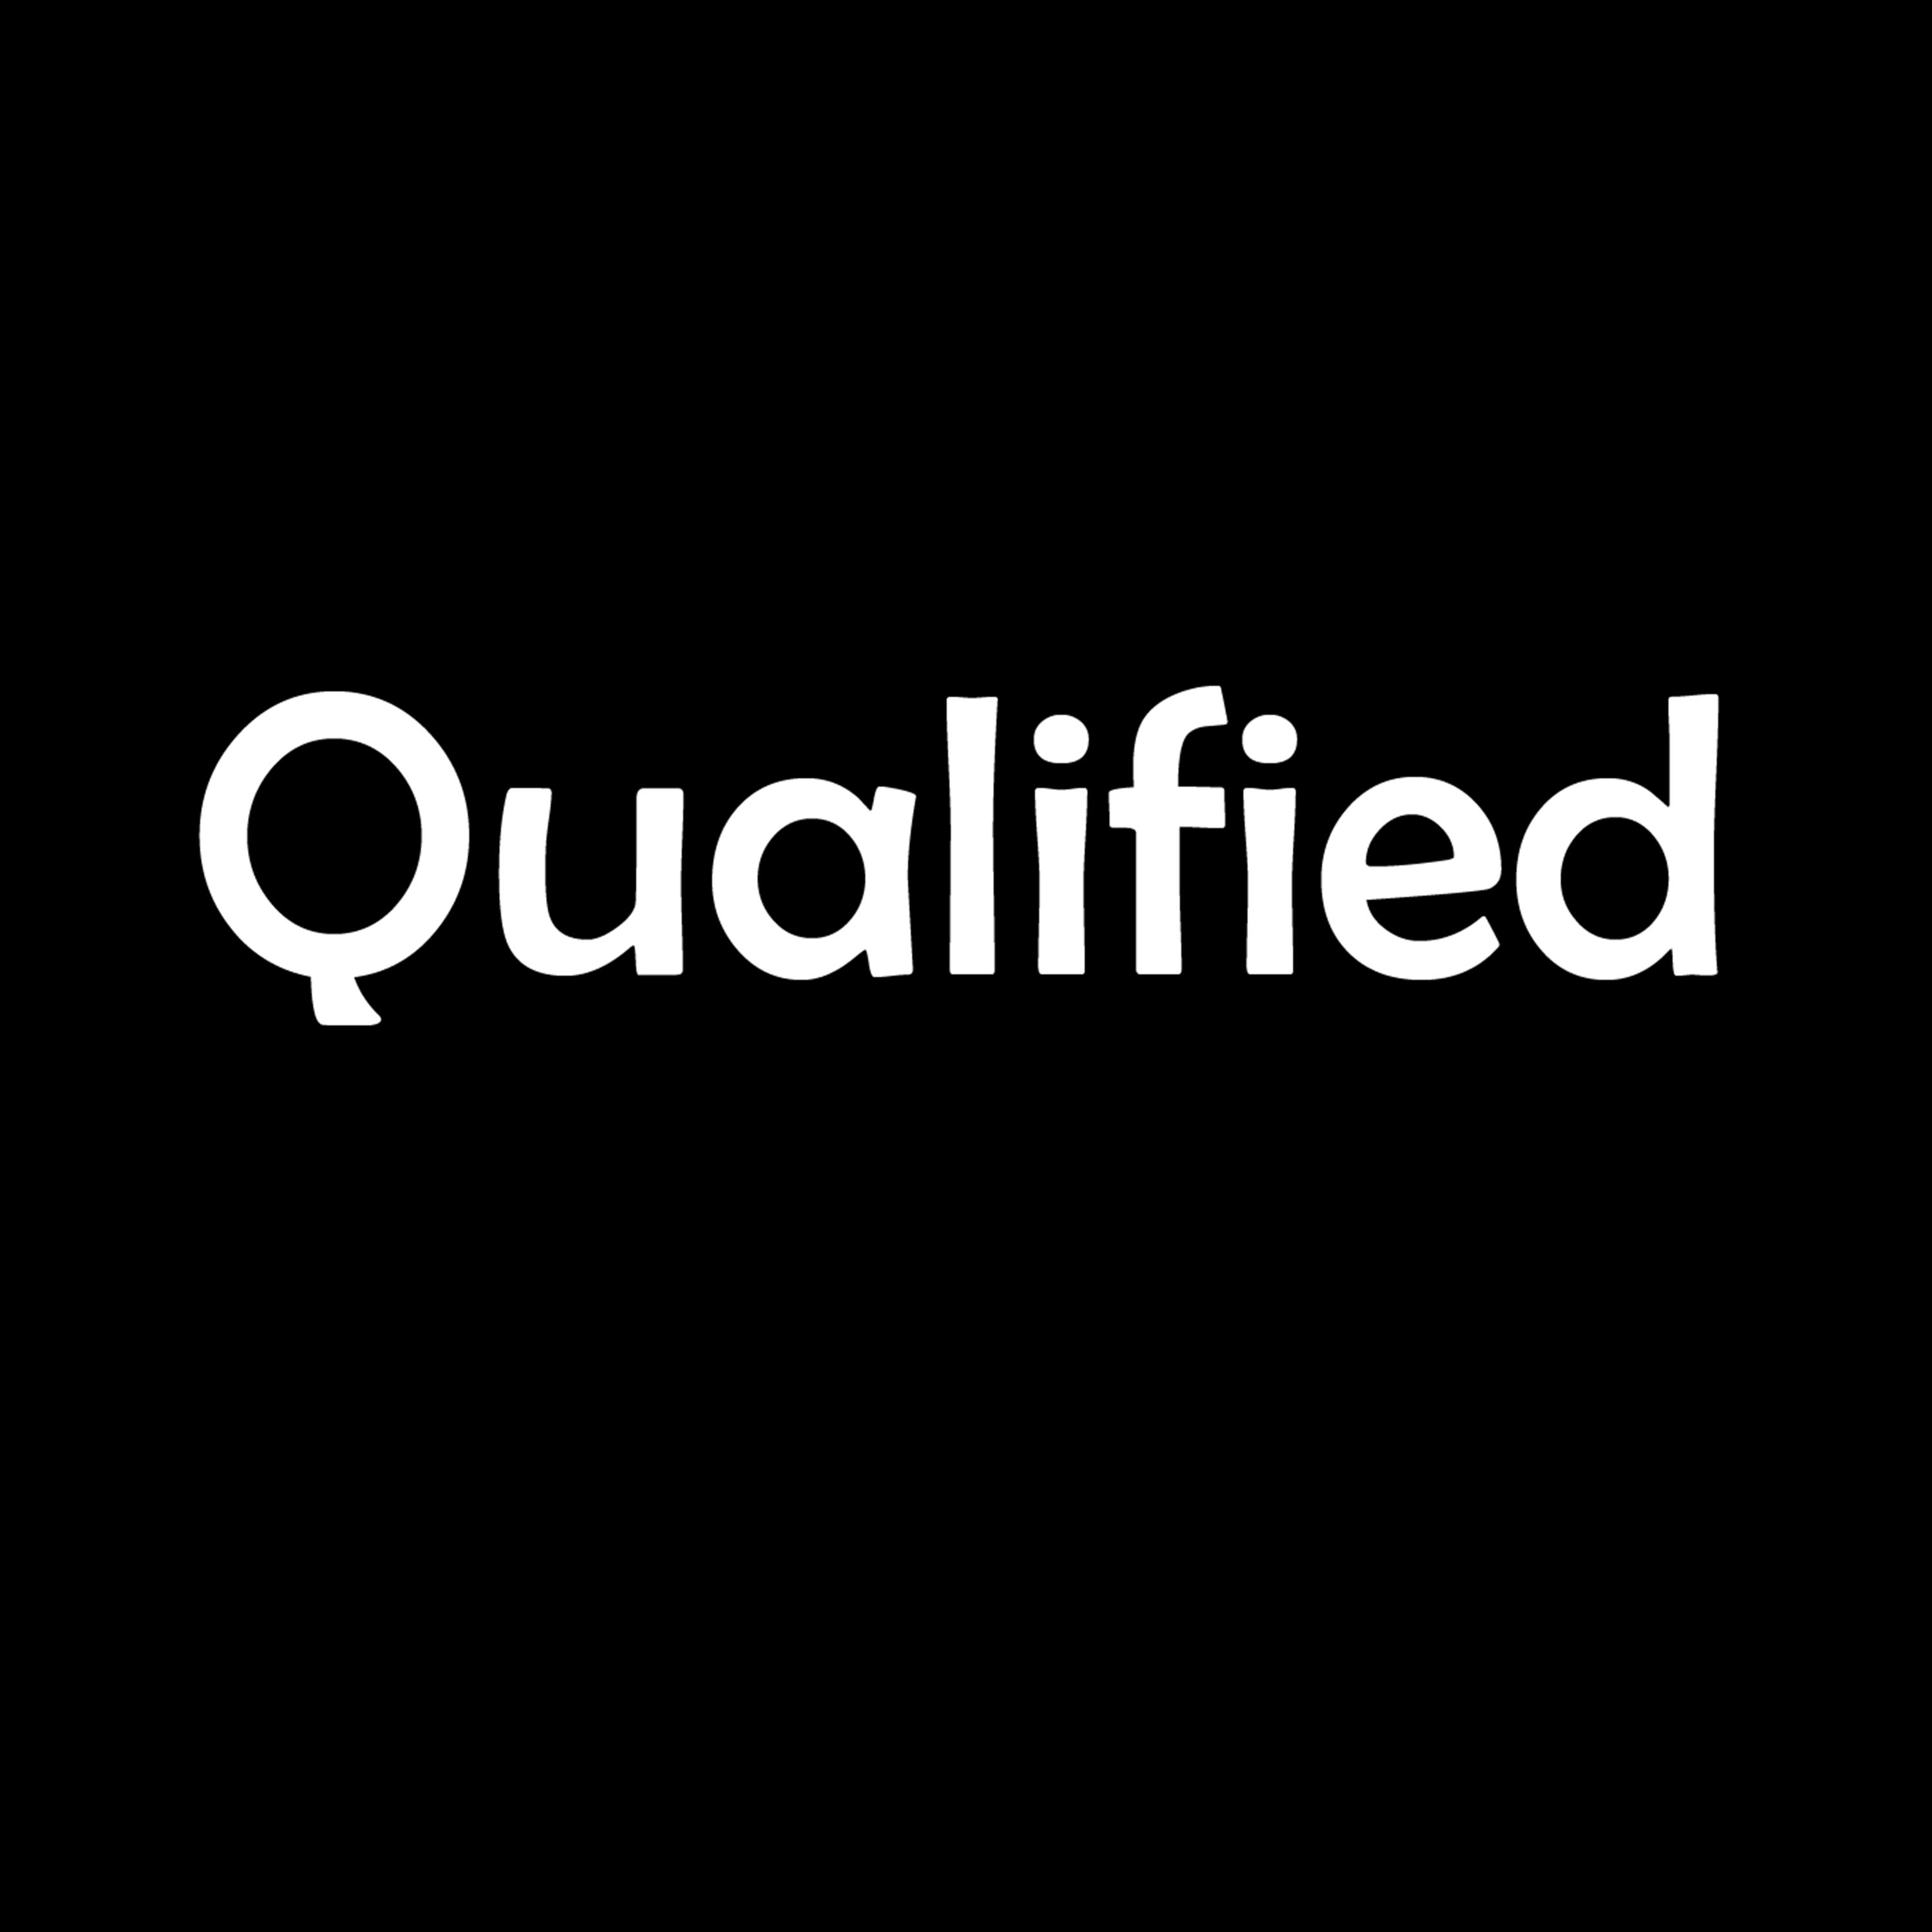 Qualified